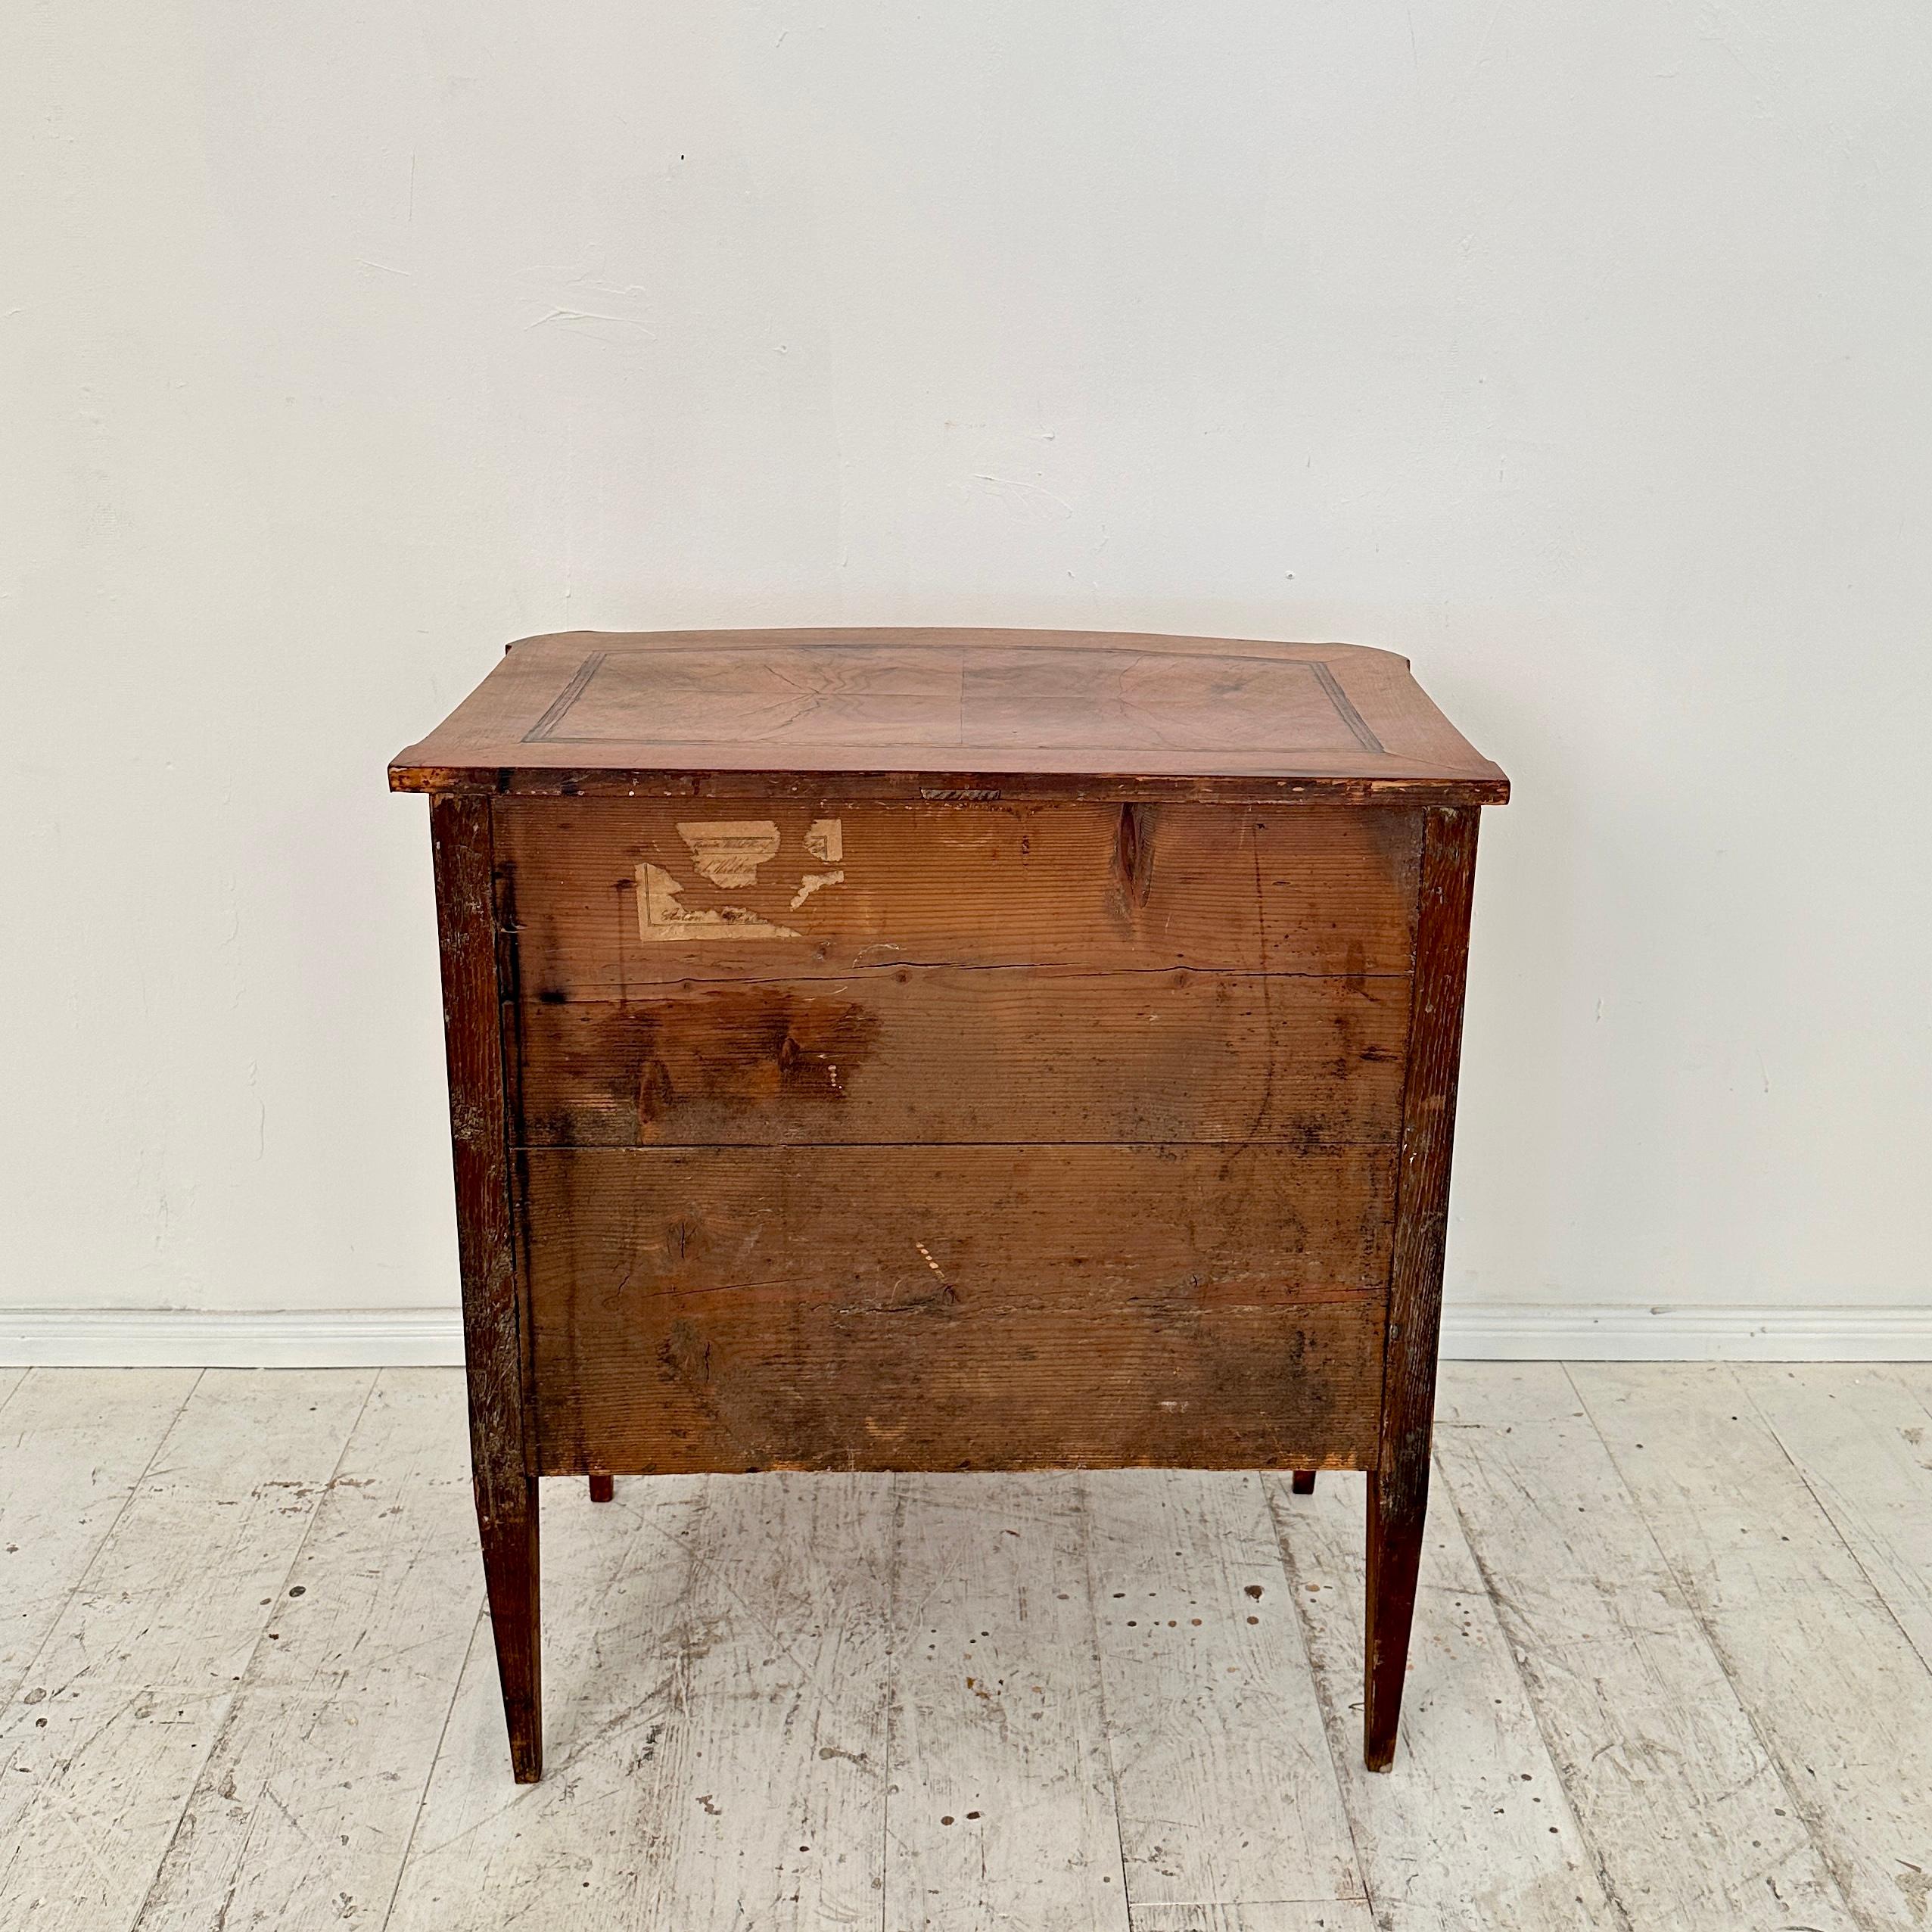 Small 18th Century German Louis Seize Commode in Walnut with 2 Drawers, 1790 For Sale 2